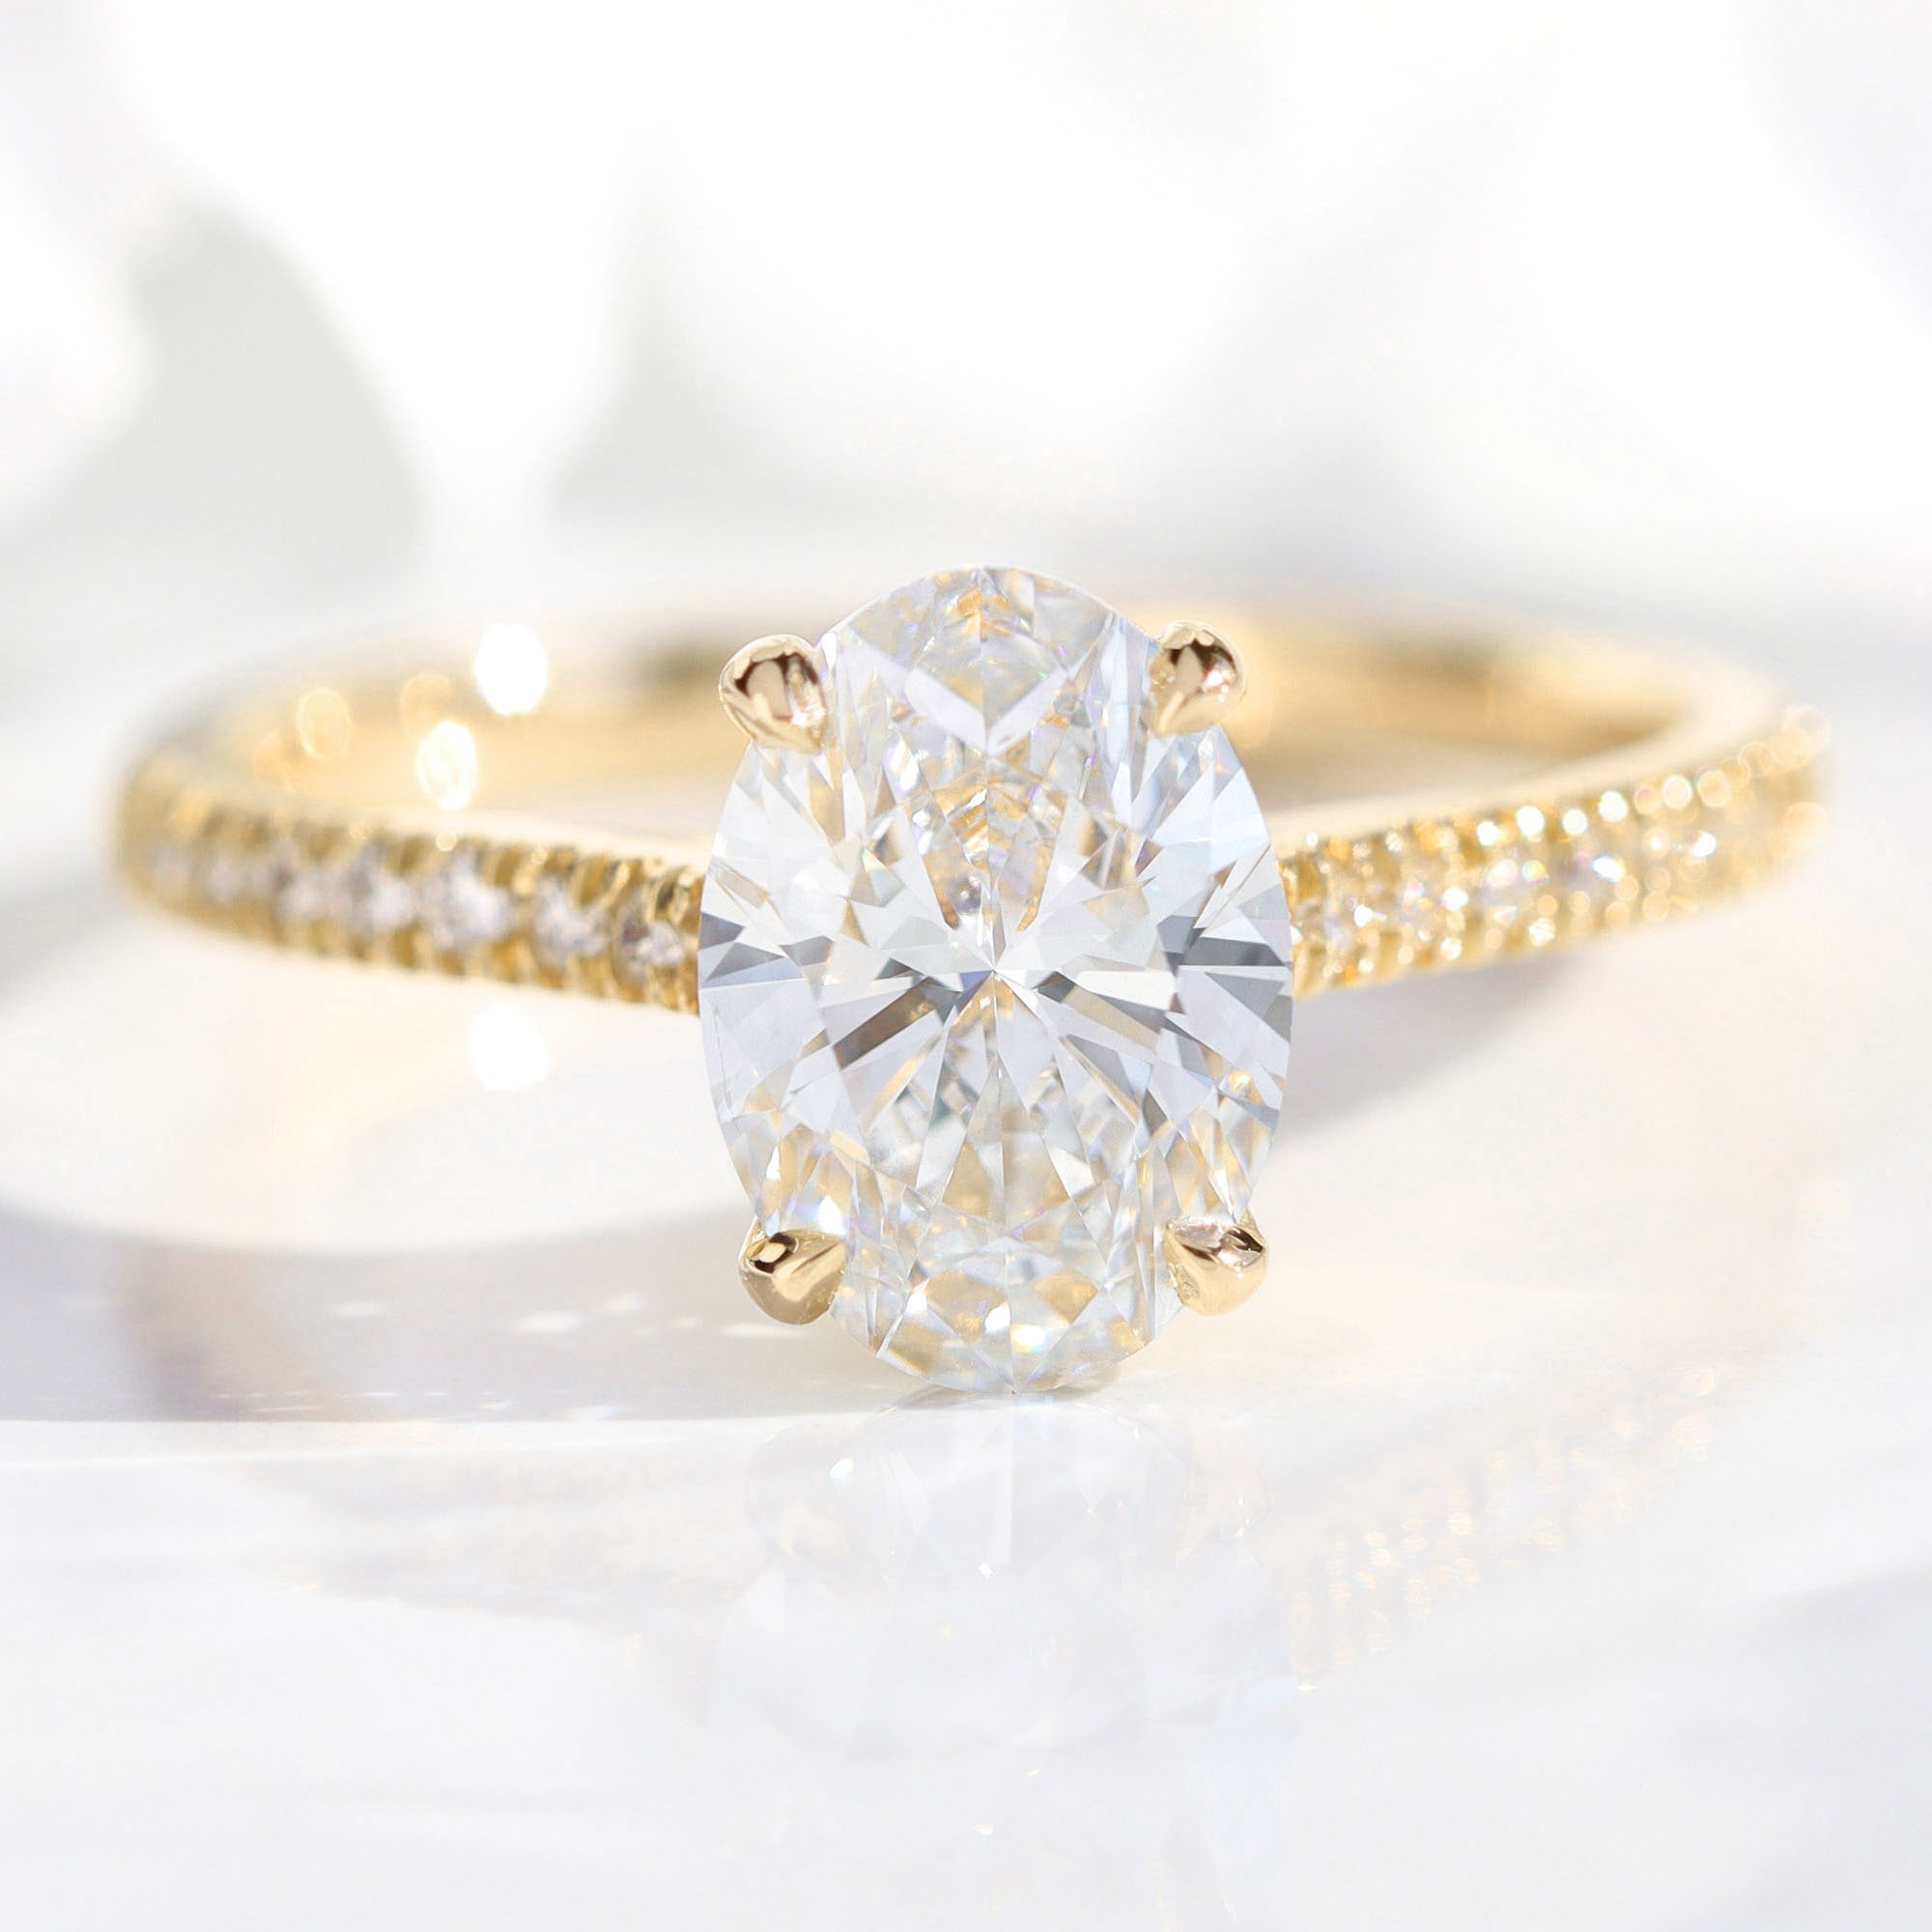 lab diamond ring yellow gold oval diamond solitaire engagement ring La More Design Jewelry